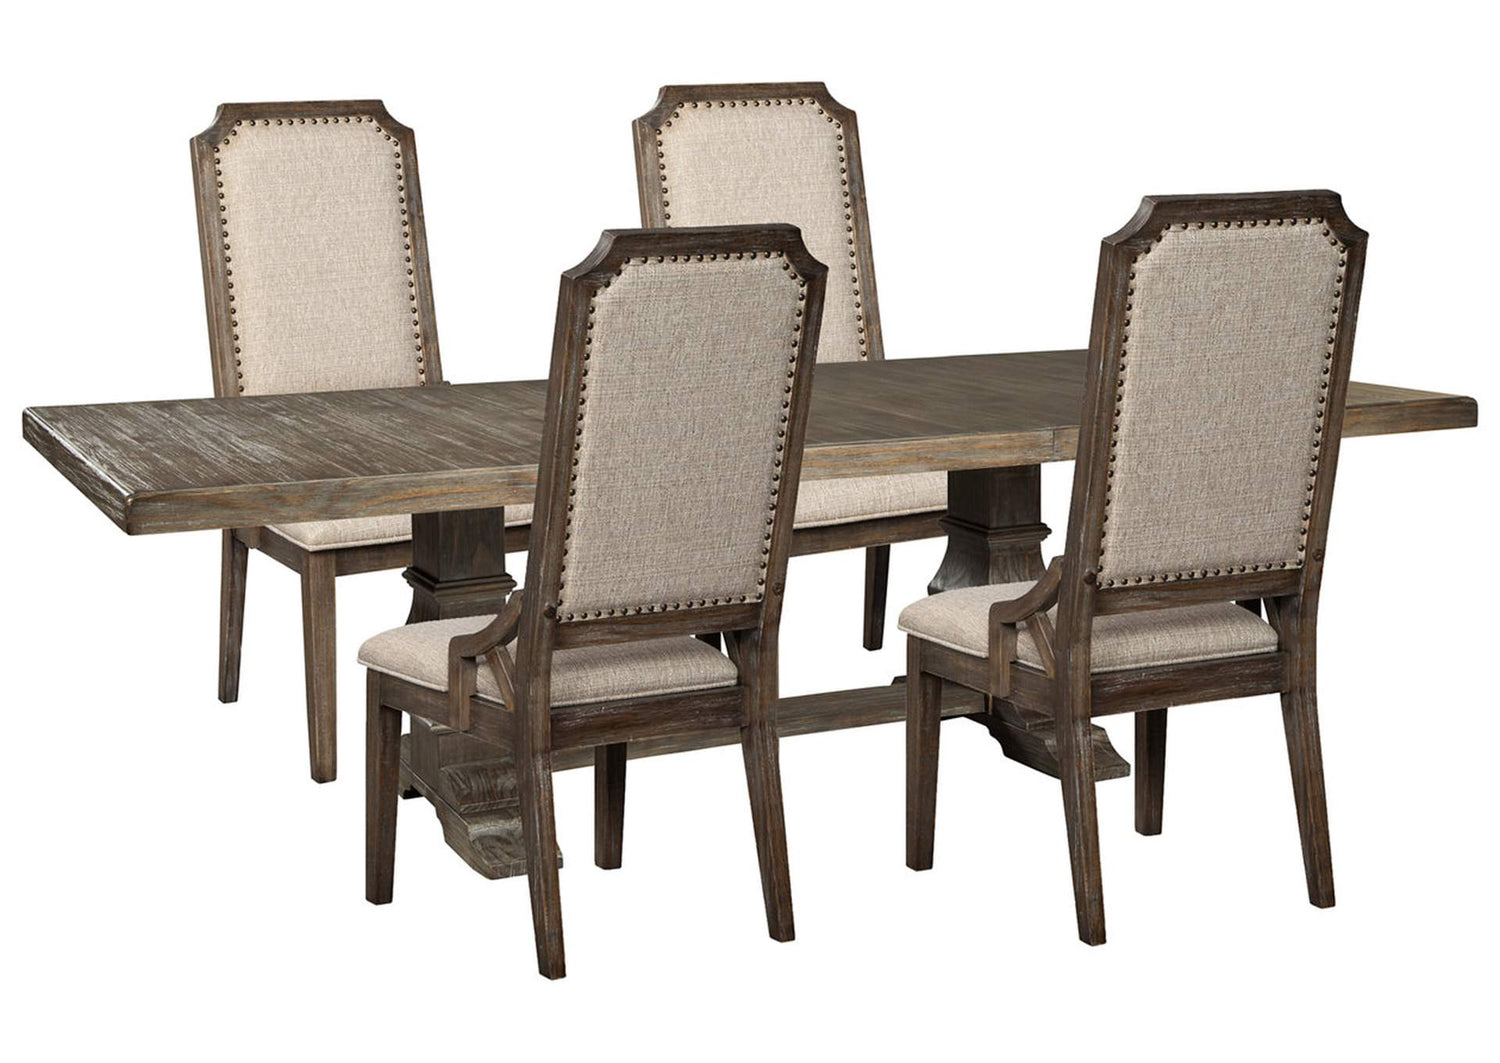 Wyndahl Rustic Brown Extendable Dining Set